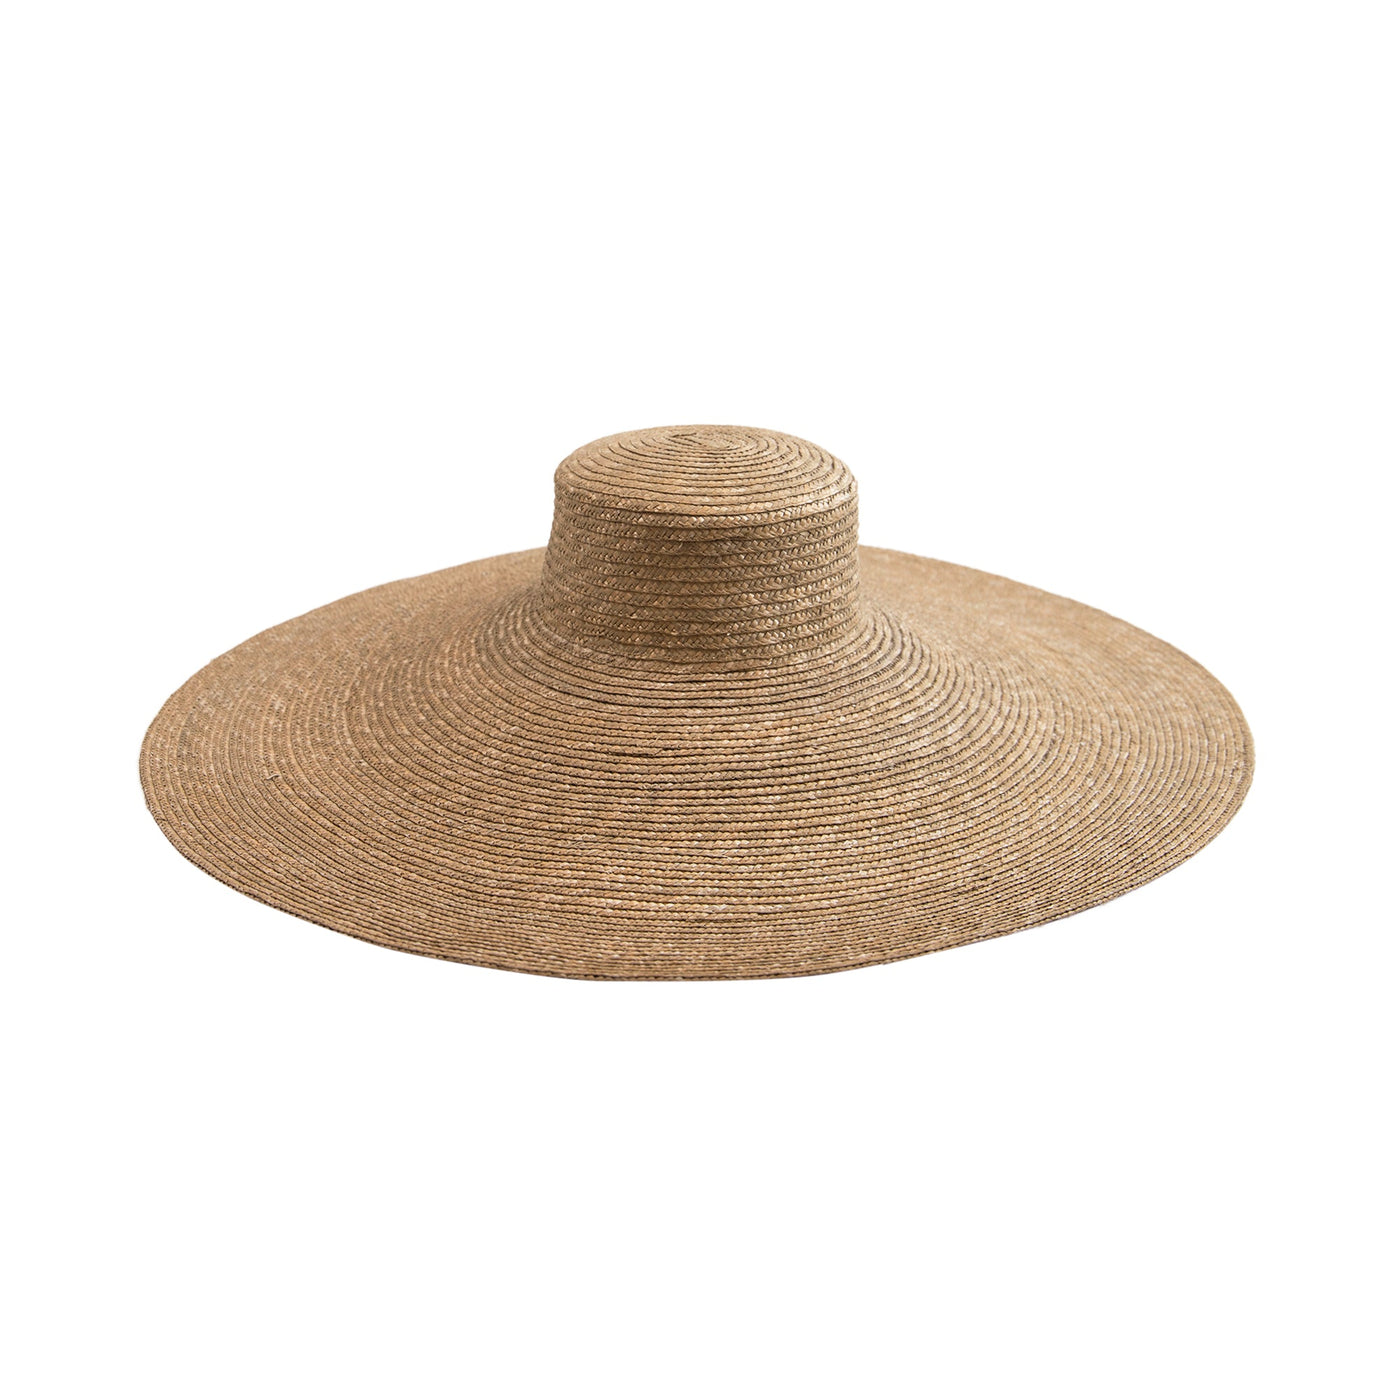 August Hat Company Floppy Sun Hat, UPF 50+ One Size Title: Natural